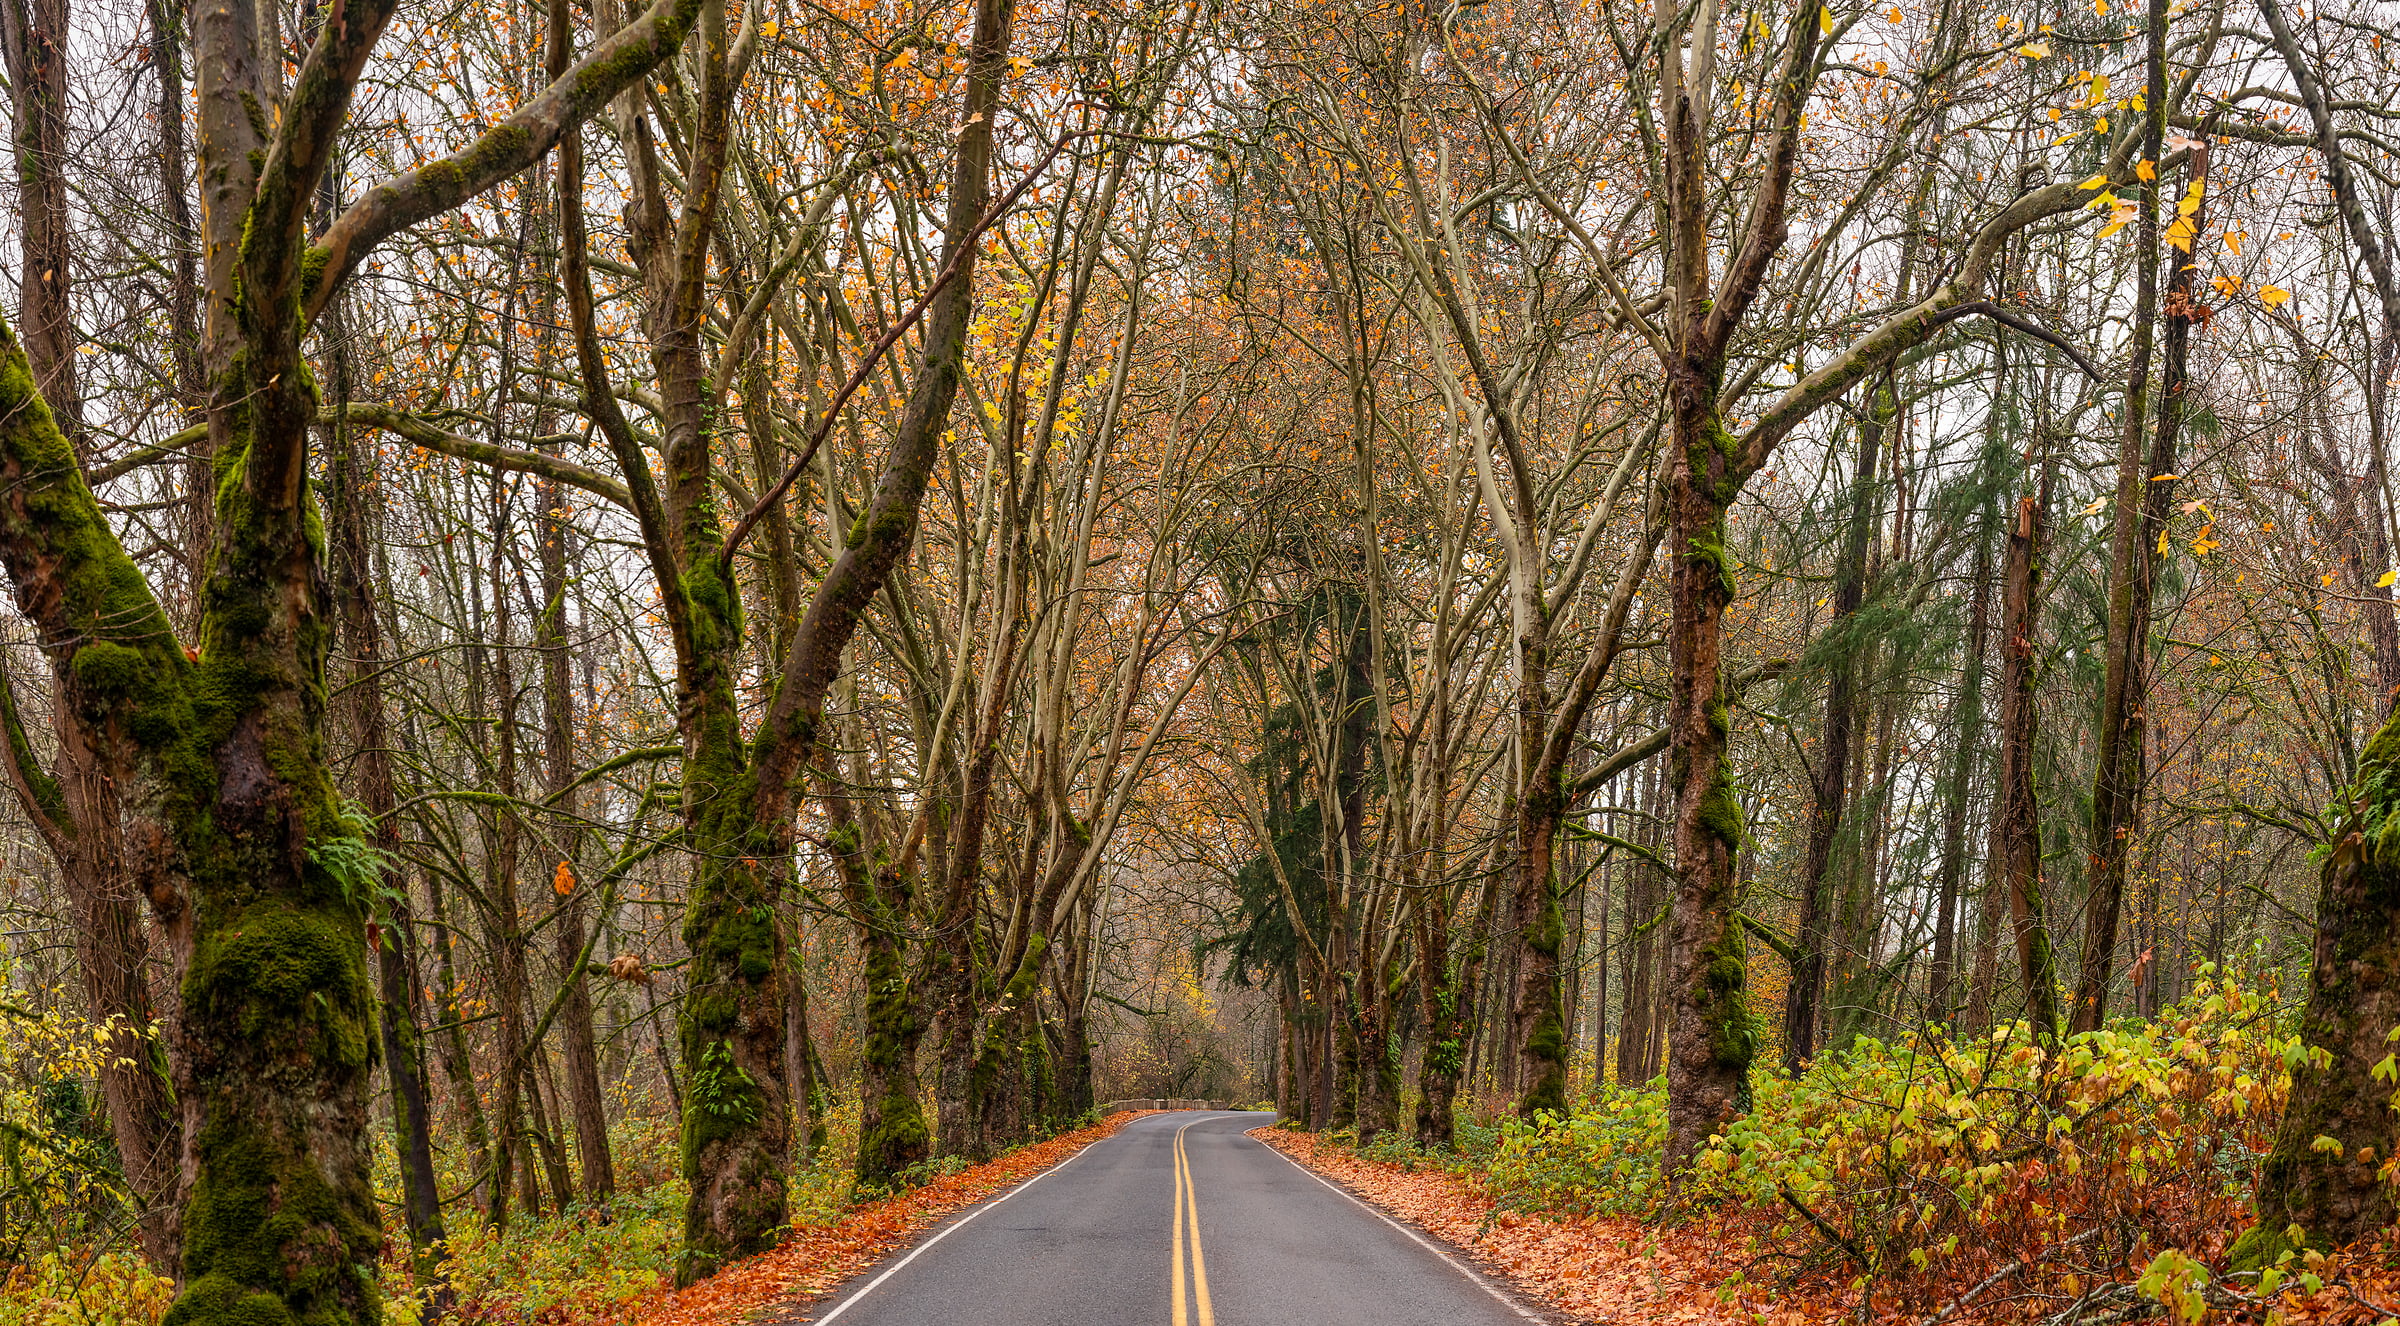 379 megapixels! A very high resolution, large-format VAST photo print of a road in a forest in autumn; nature photograph created by Scott Rinckenberger in Reinig Road Sycamore Corridor, Snoqualmie, Washington.